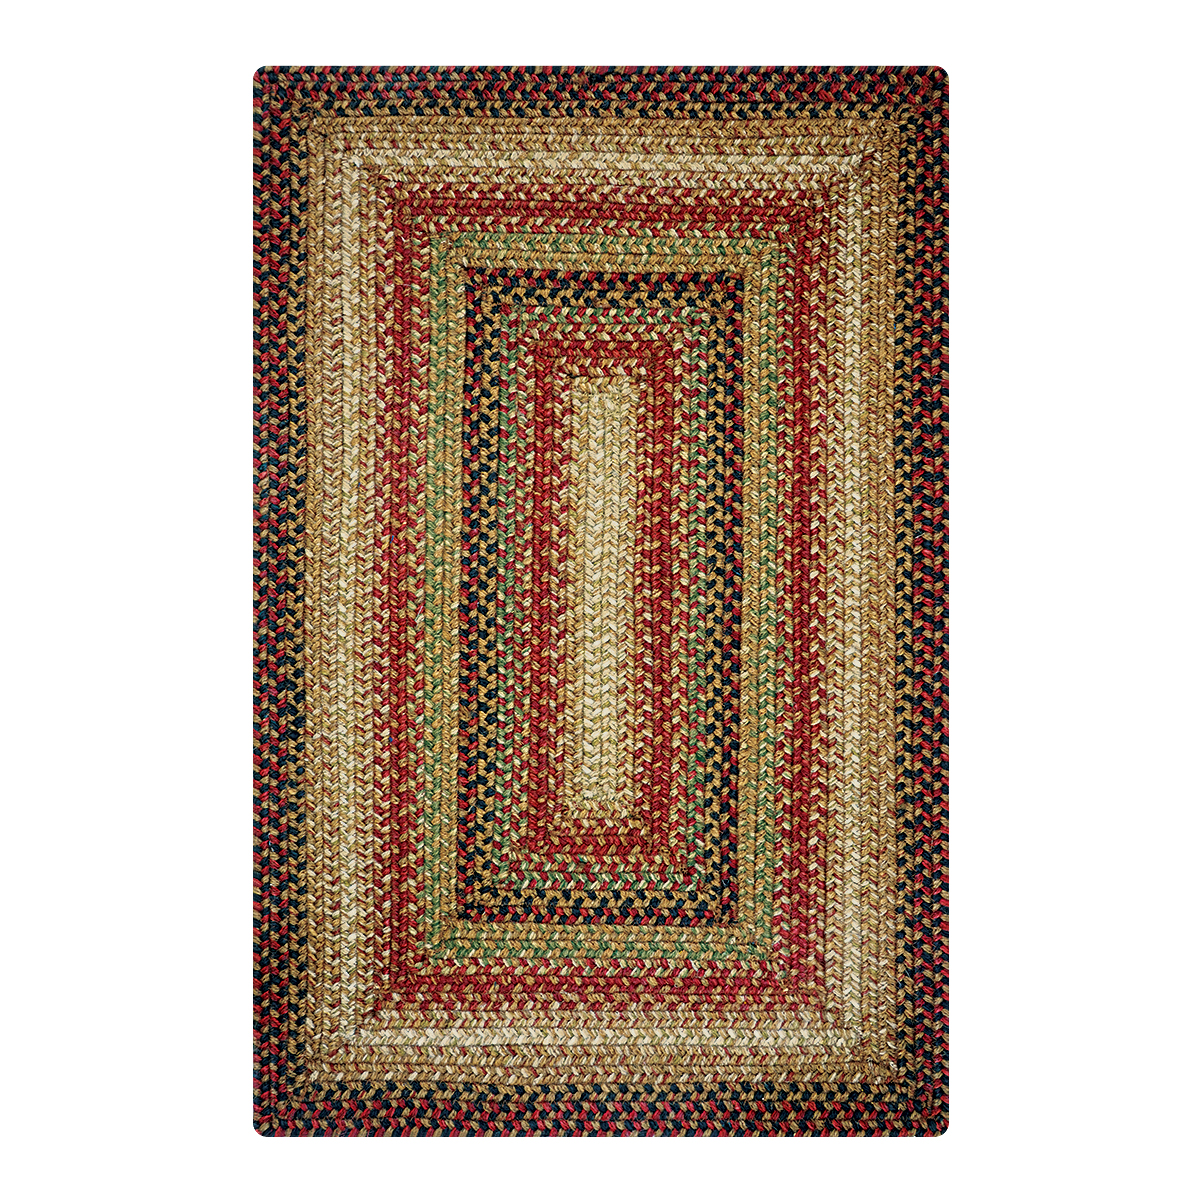 571809 11 X 36 In. Gingerbread Oval Table Runner - Brown, Deep Red